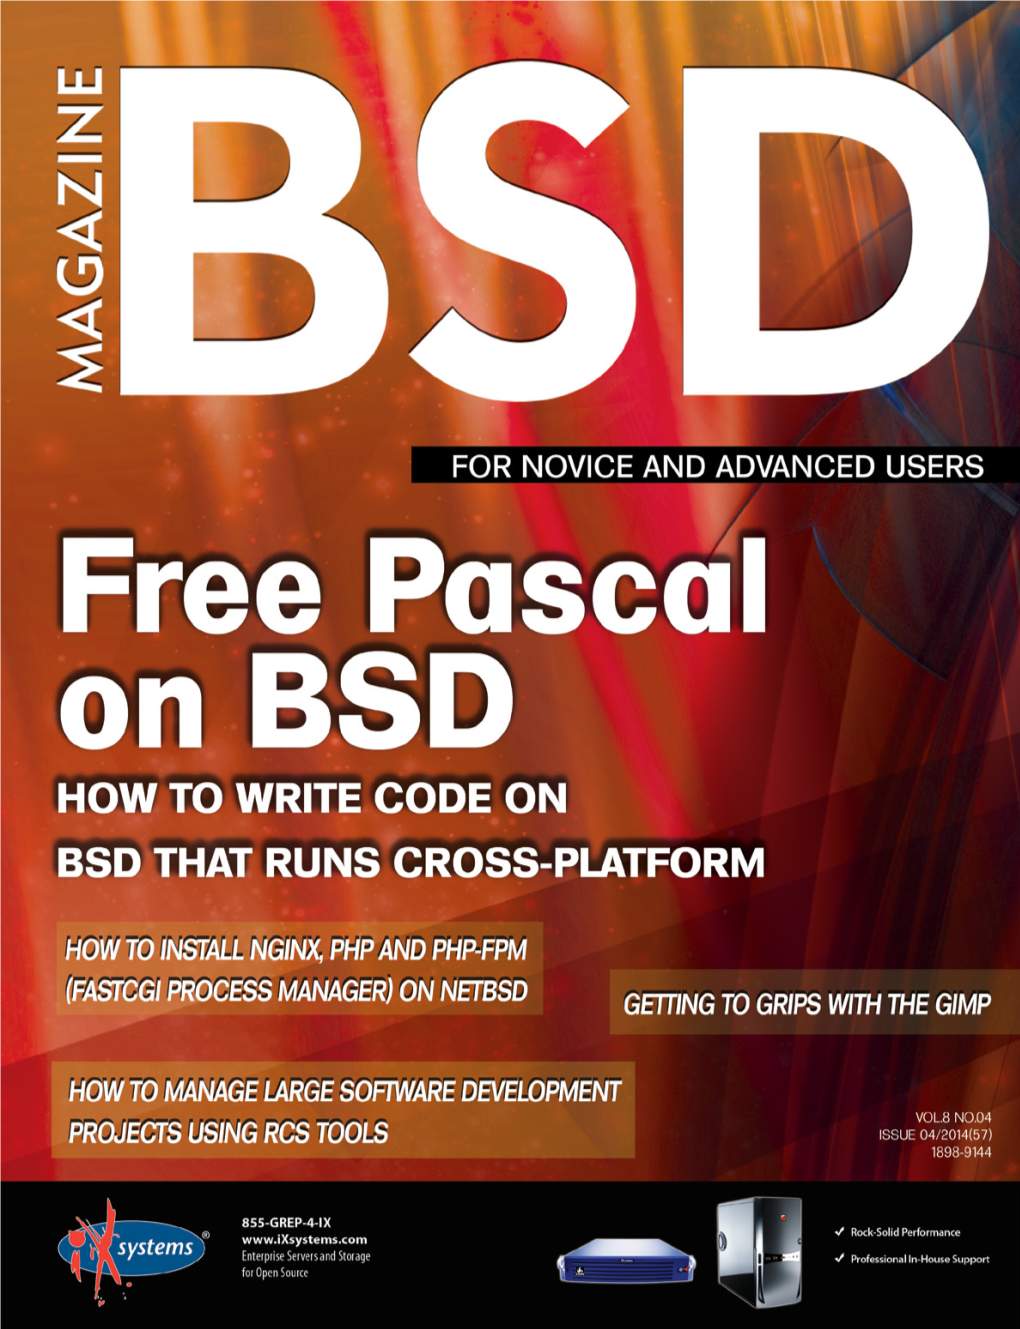 Netbsd, I Would Like Art Director: to Invite You to Read the Article Written by Diego Montalvo